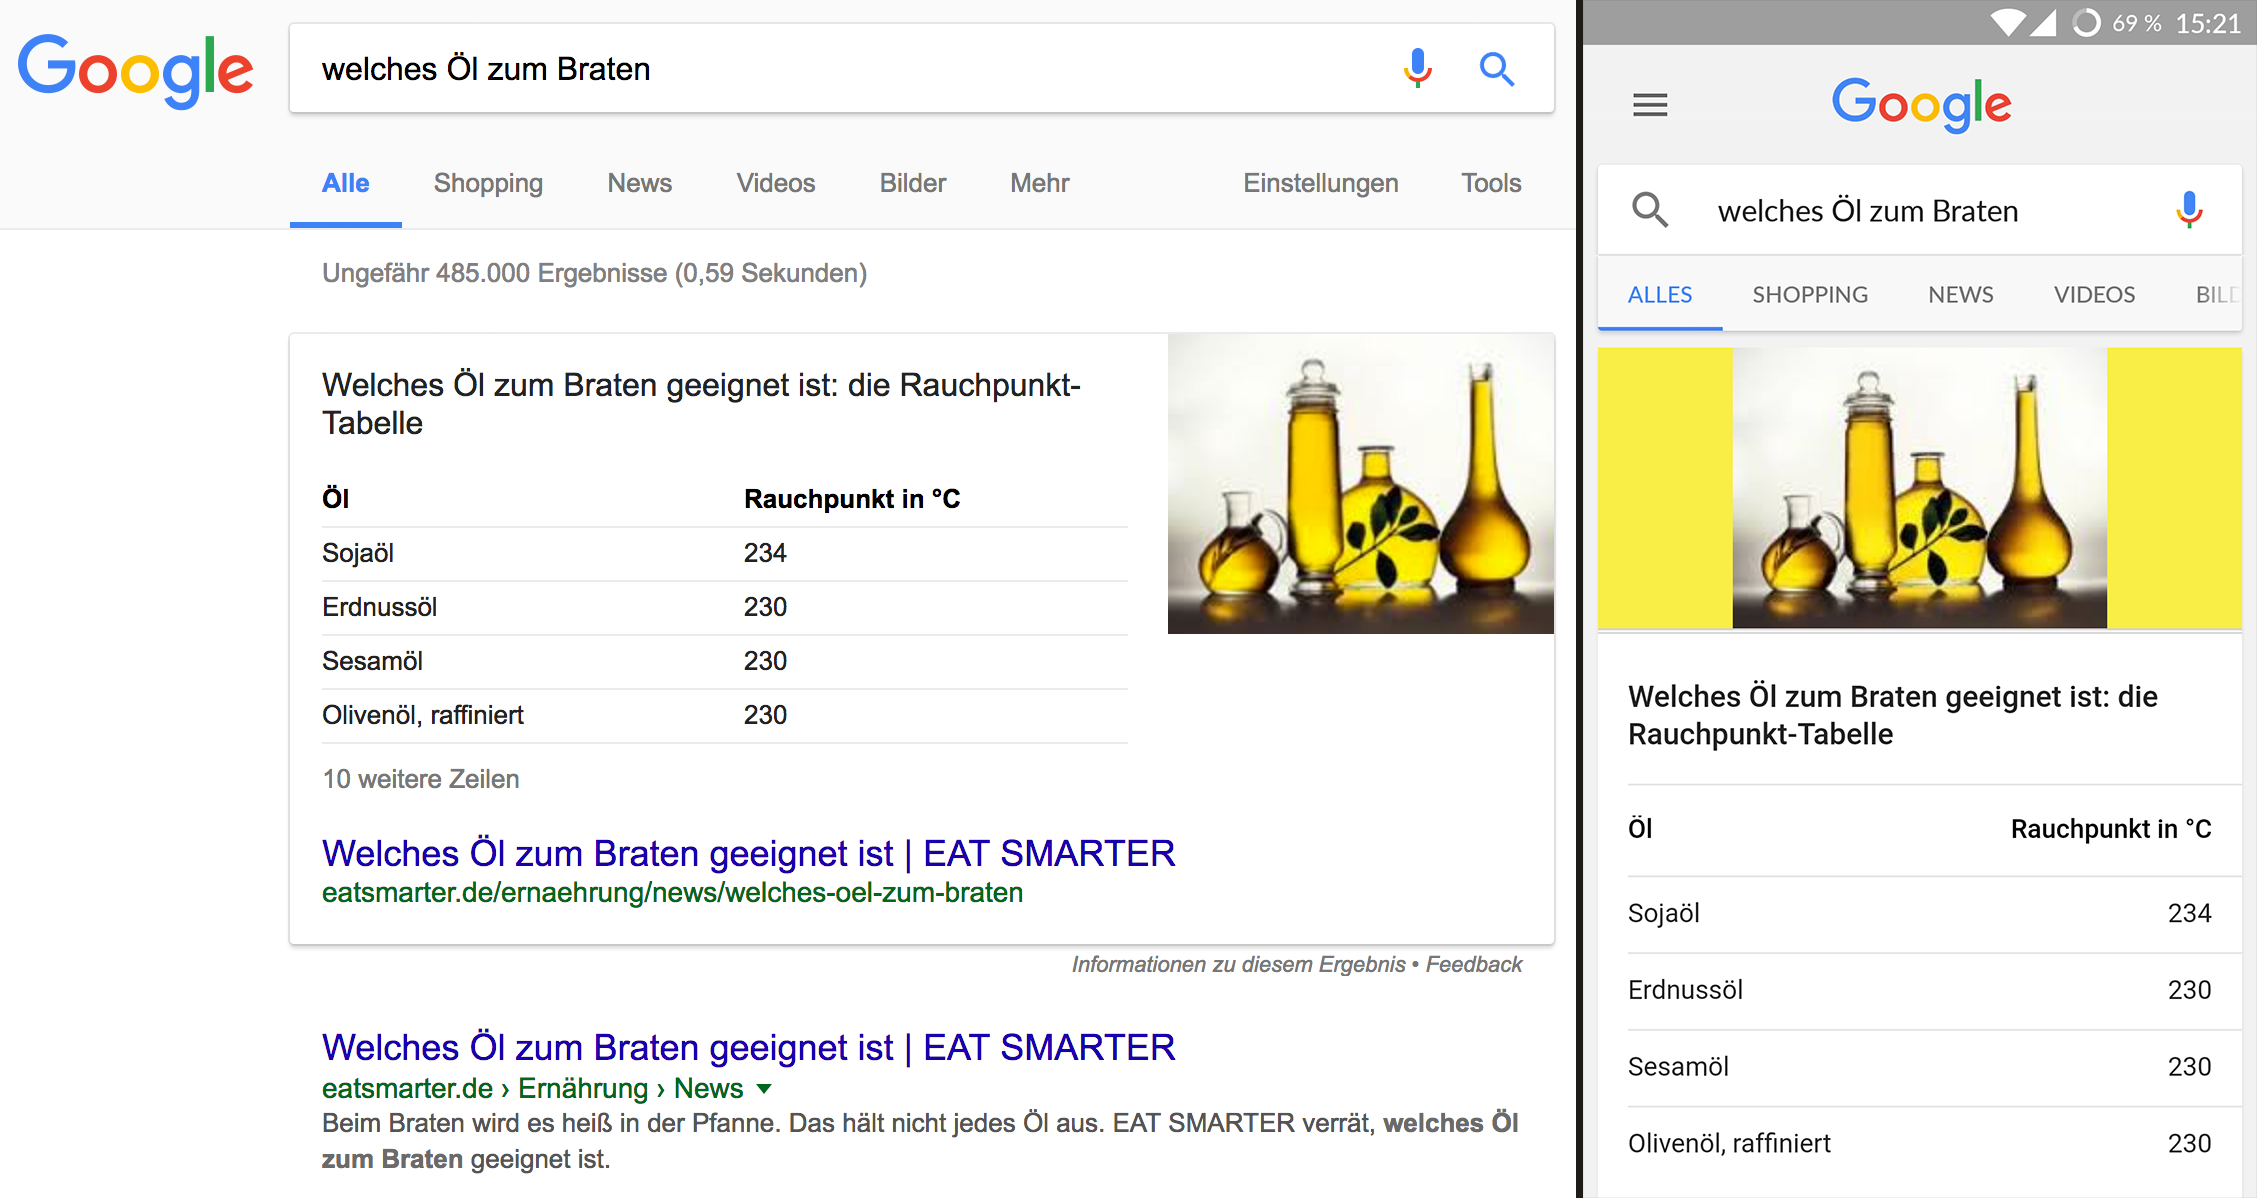 Featured Snippet Darstellung als Tabelle